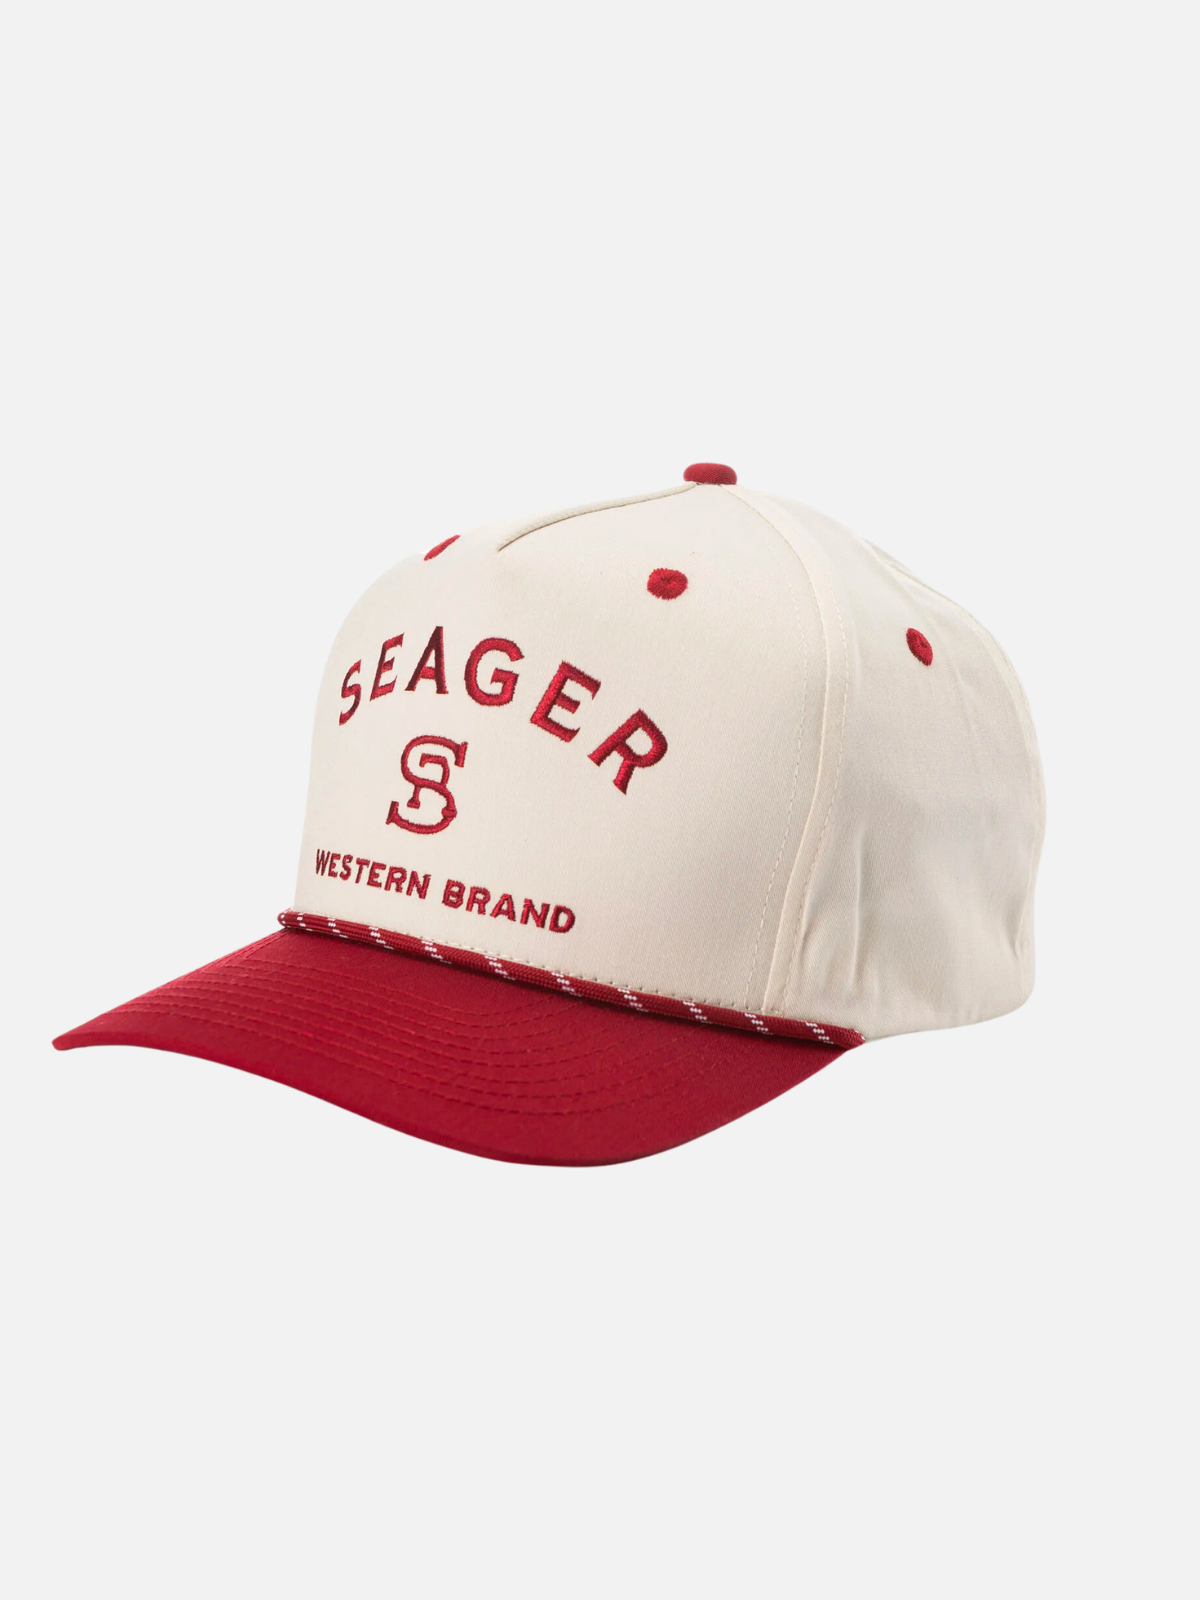 seager branded snapback trucker hat cotton polyester blend maroon red cream embroidered design kempt athens ga georgia men's clothing store